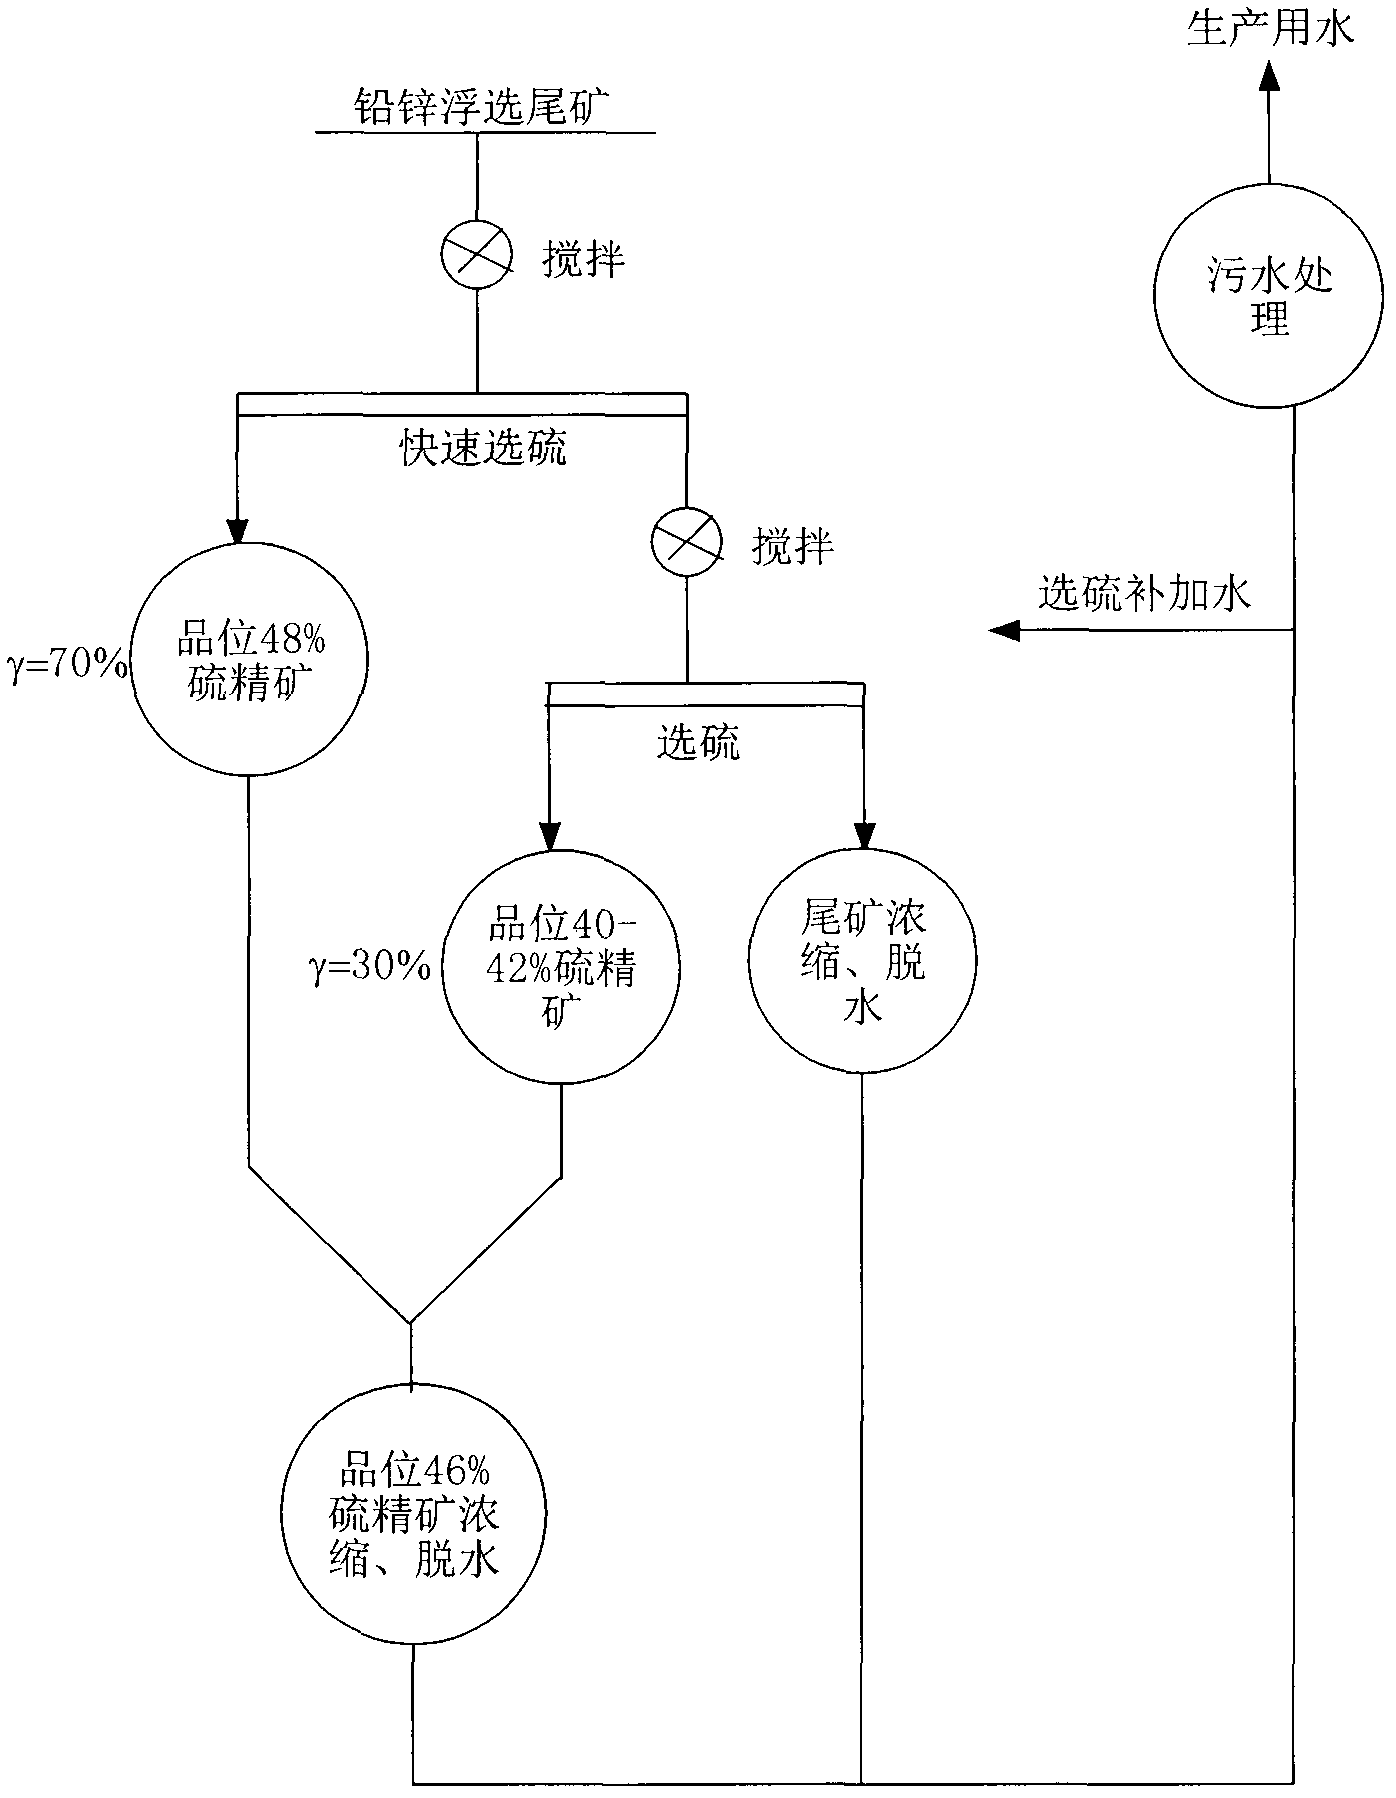 Method for floating high-grade sulfur concentrate from lead-zinc tailings by flow separation and speed division method